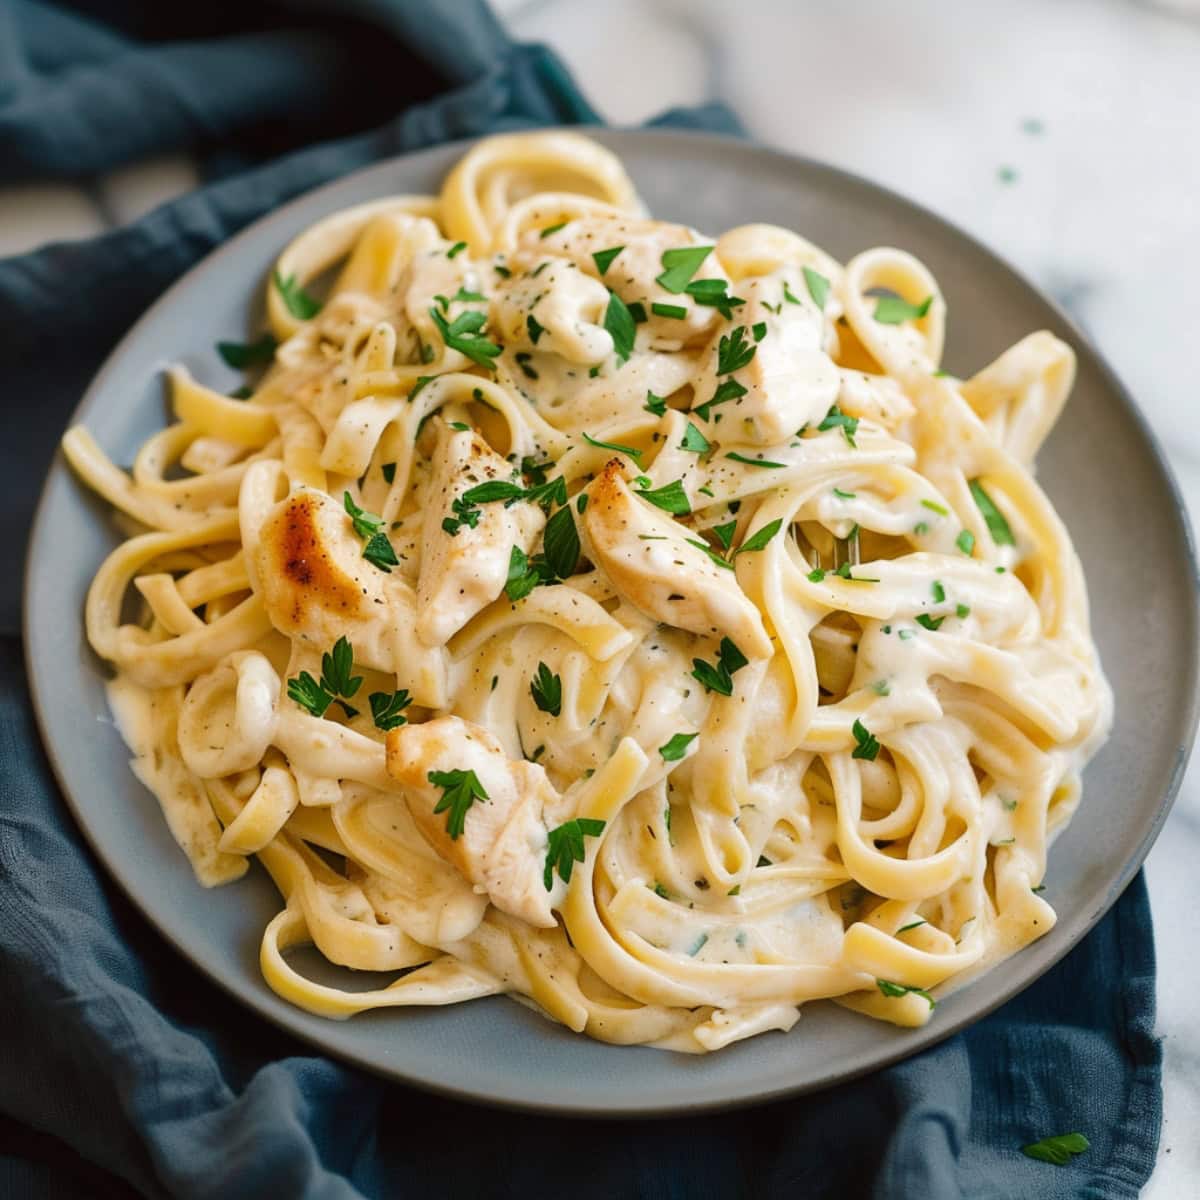 Homemade chicken Alfredo, made with a rich, buttery sauce and tender pasta.